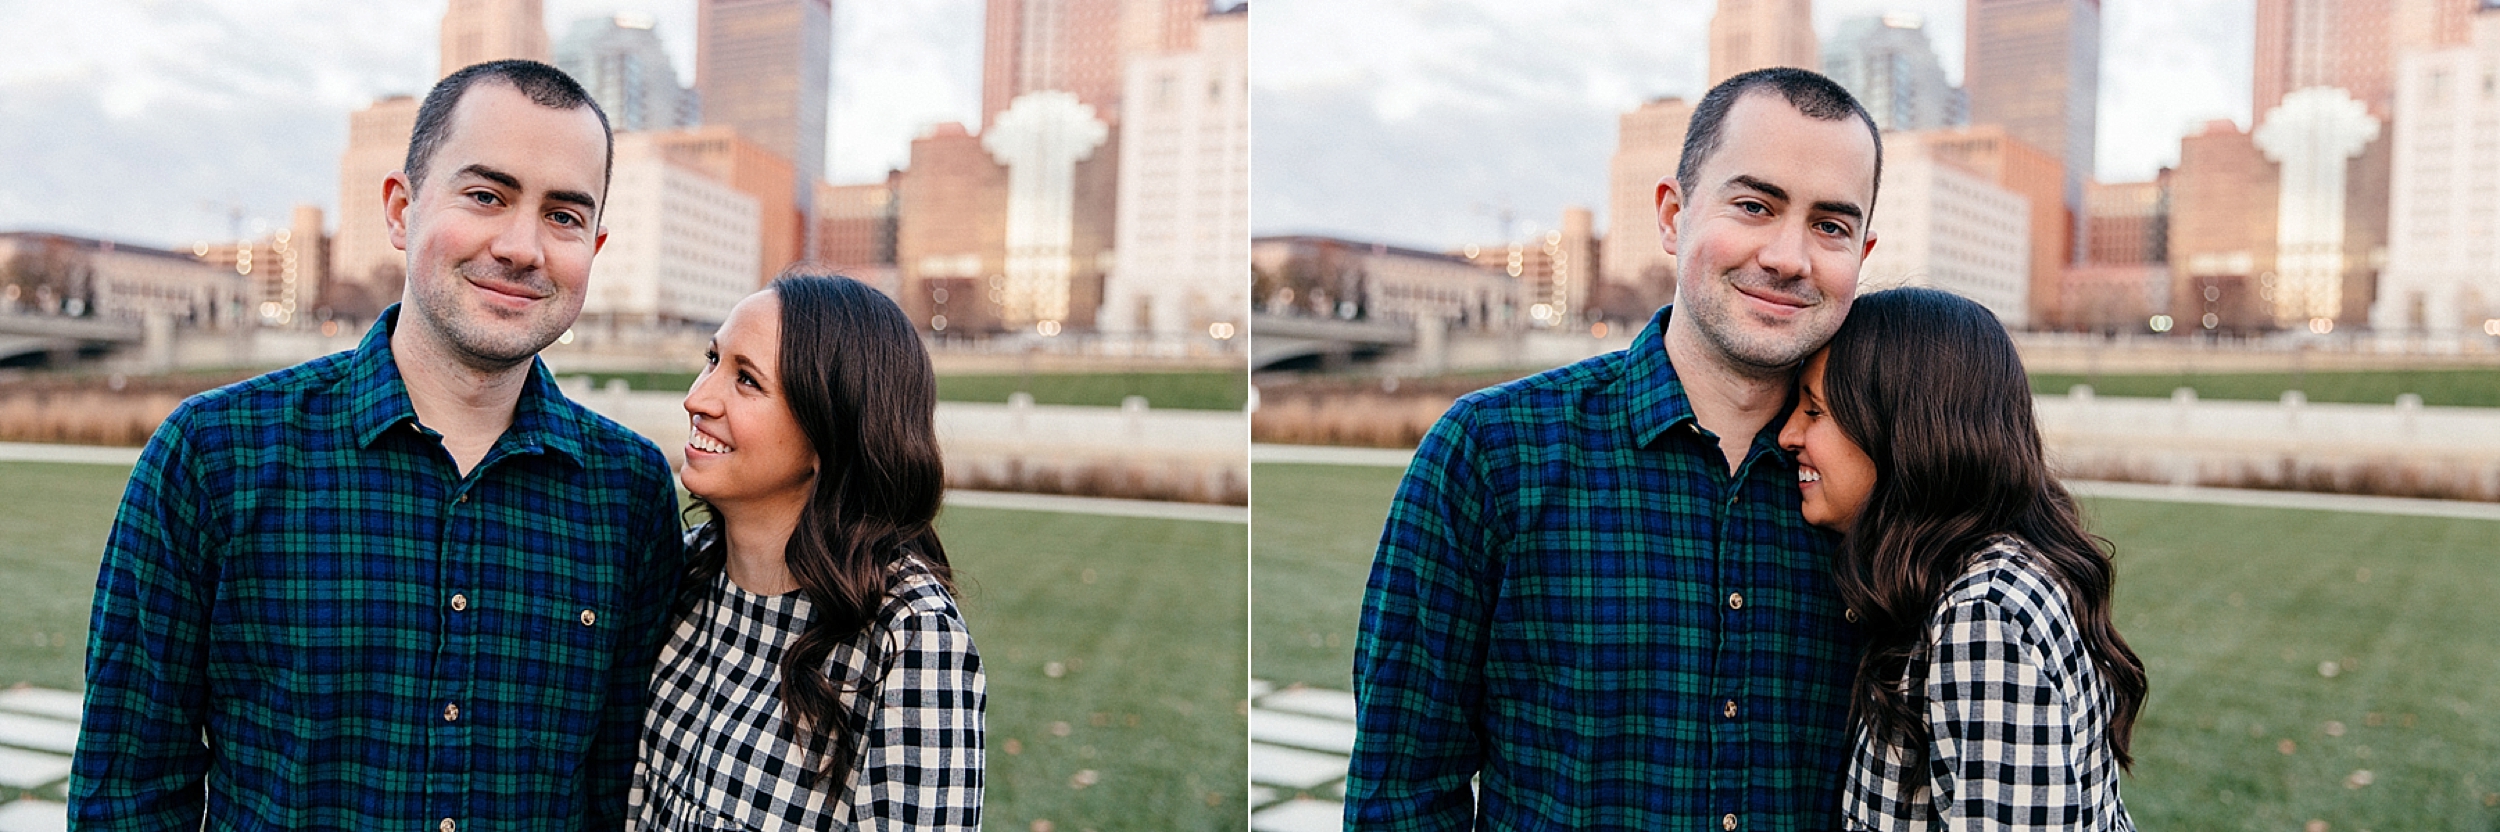 midwest-michigan-indiana-engagement-and-wedding-photographer-session-in-columbus-ohio_0010.jpg